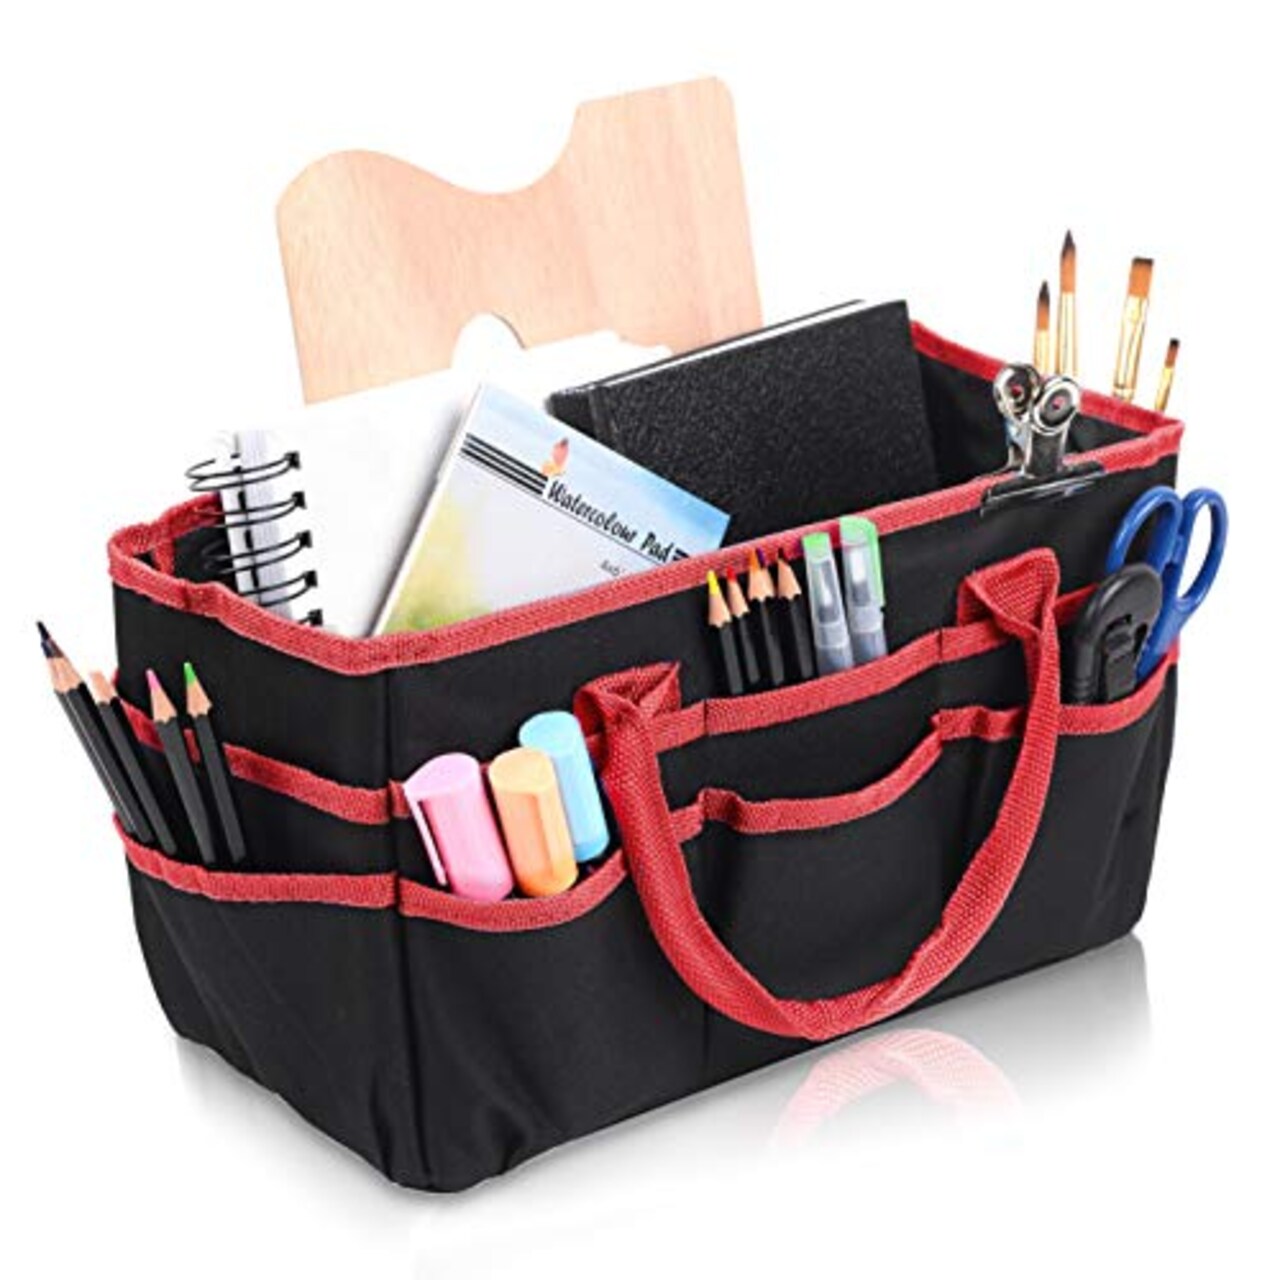 JJRING Craft and Art Organizer Tote Bag - 600D Red Nylon Fabric Art Caddy  with Pockets - for Art, Craft, Sewing, Medical, and Office Supplies Storage